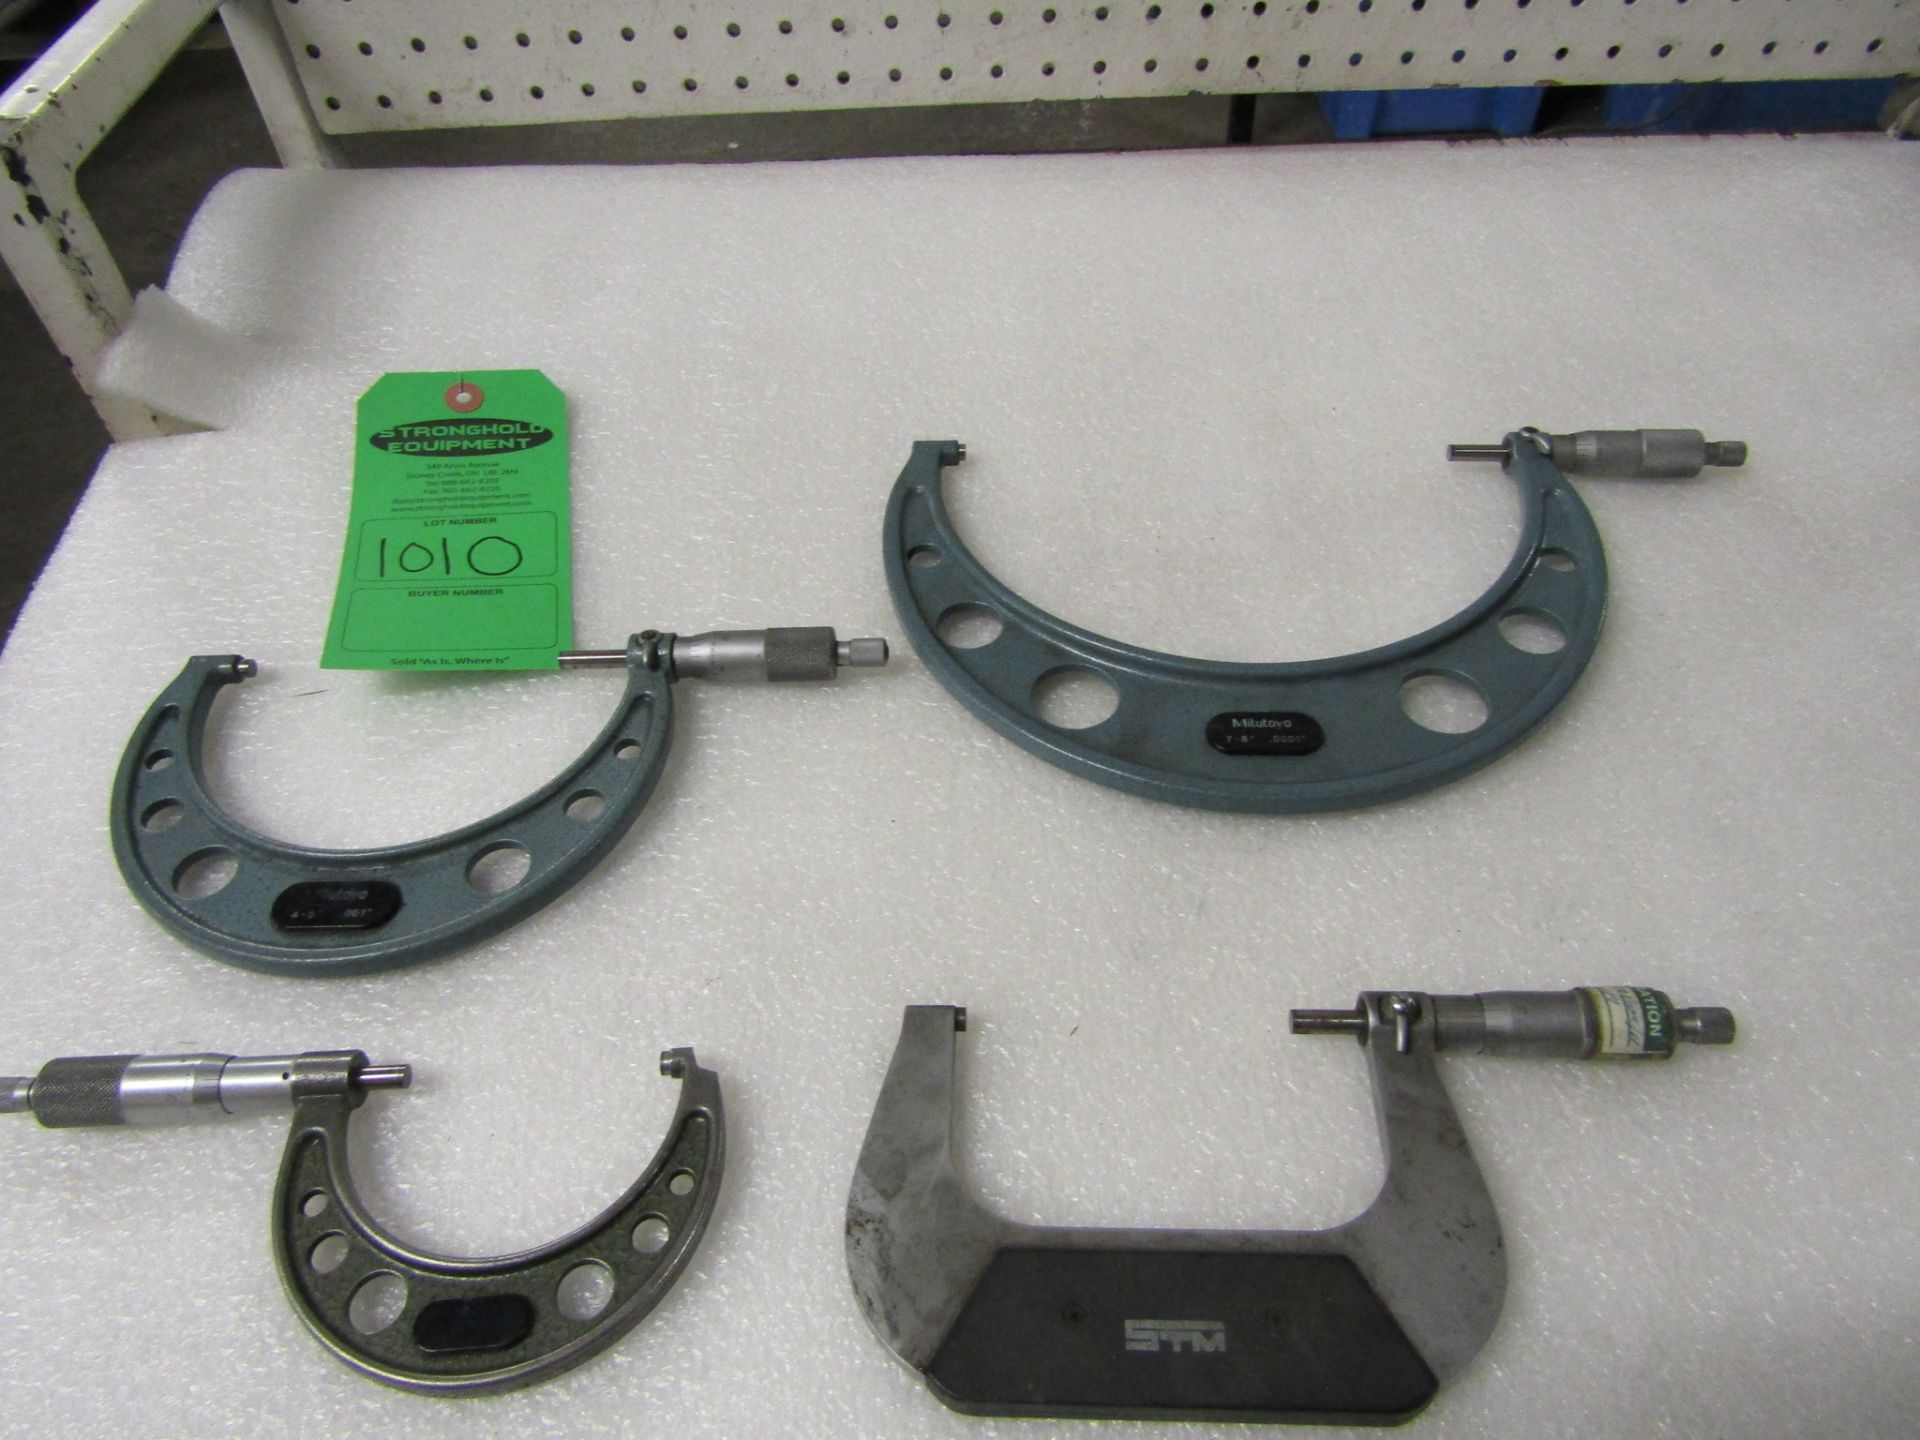 Lot of 4 (4 units) Mitutoyo & STM Outside Micrometers up to 8" range with 0.0001" accuracy